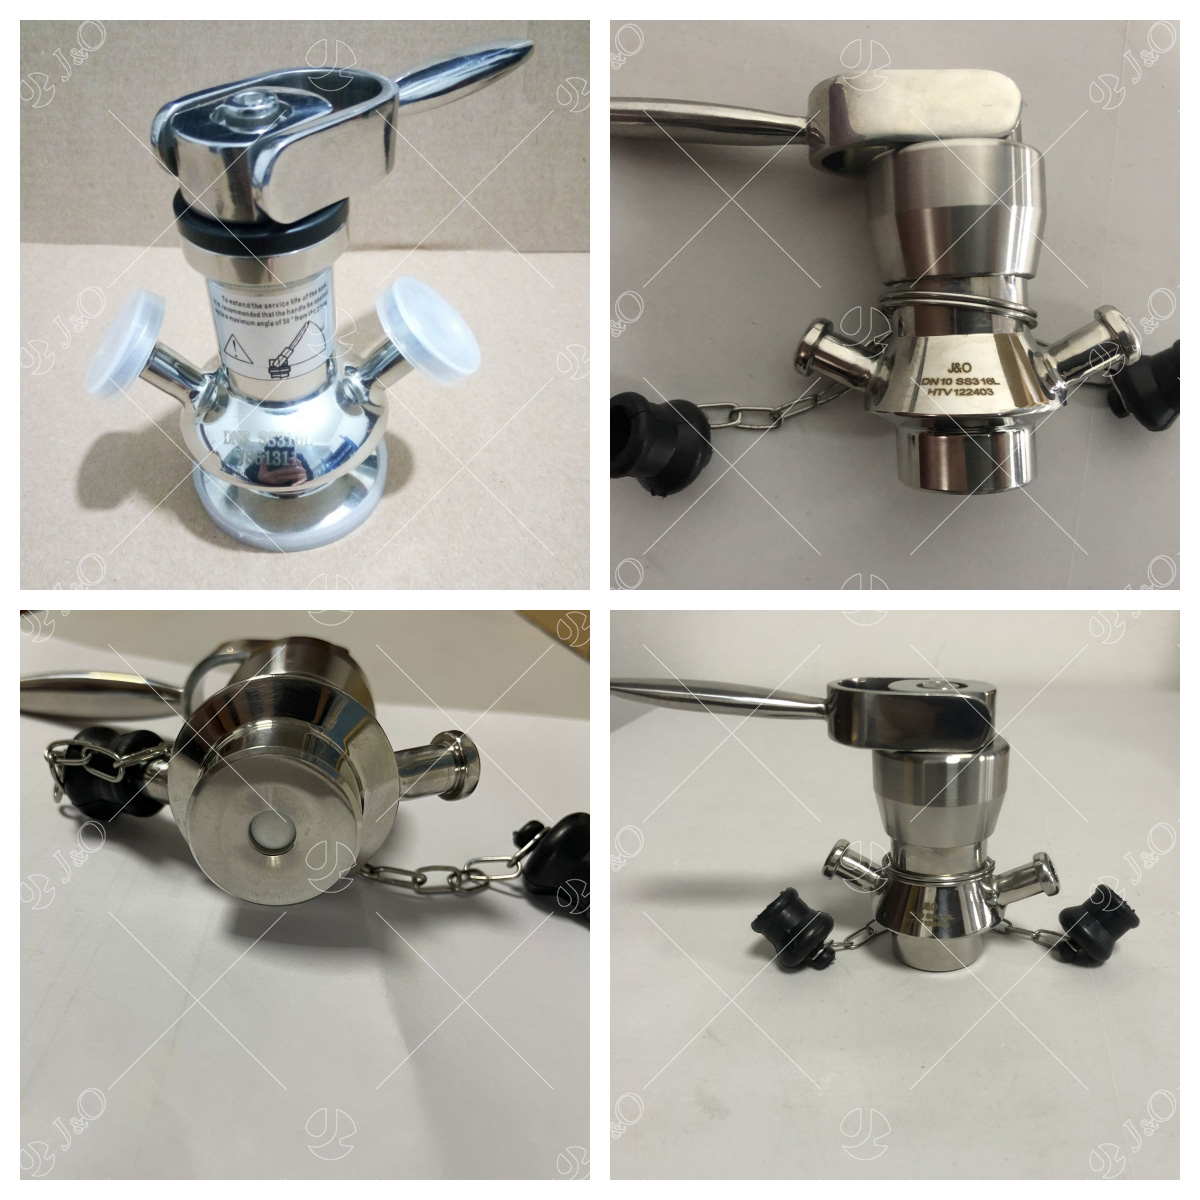 Sanitary Stainless Steel Aseptic Sampling Valve With Stainless Steel Handle